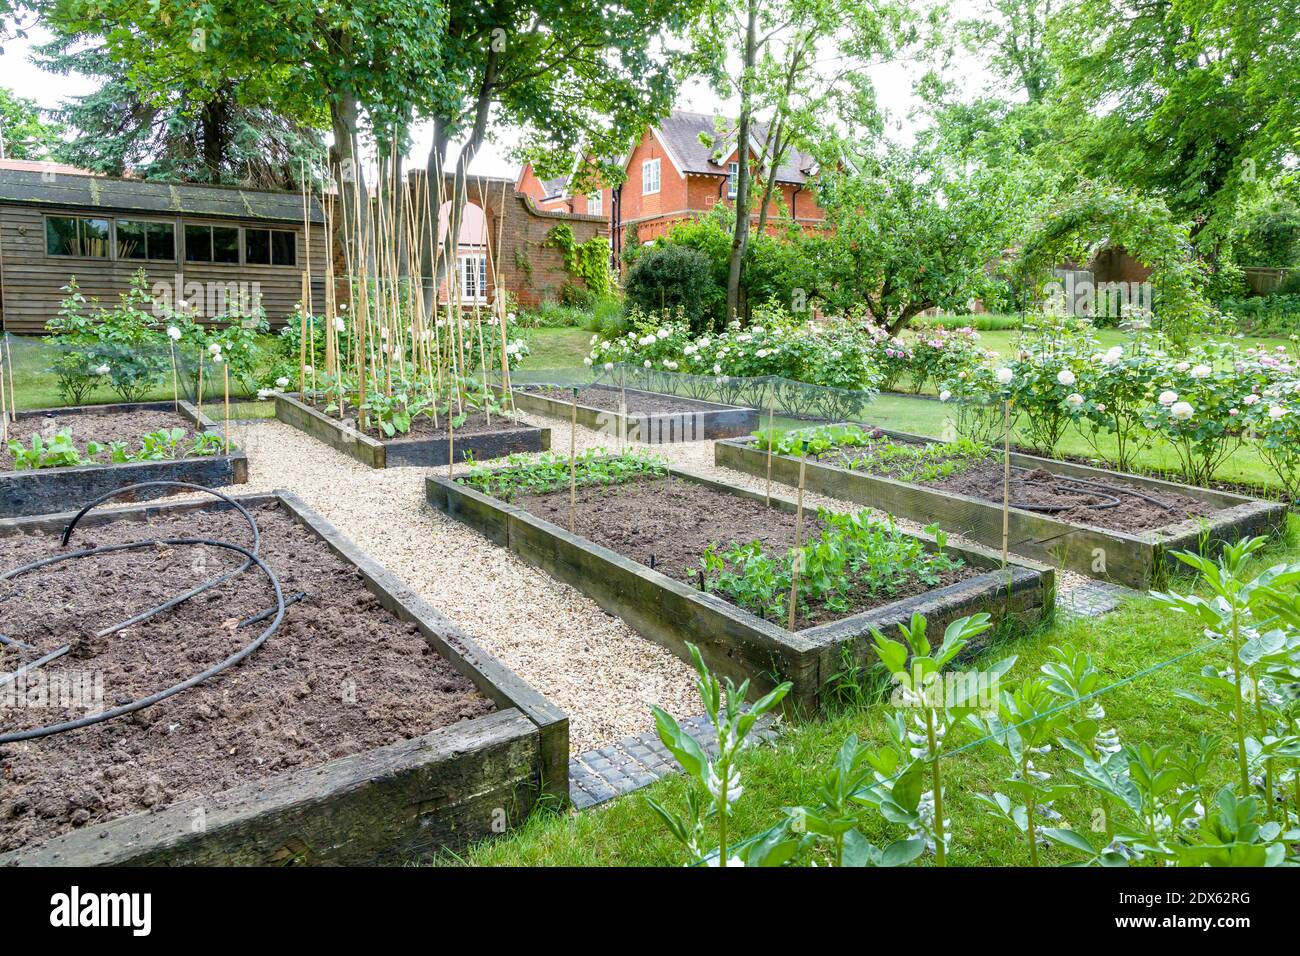 Vegetable garden, vegetables growing in raised beds in a large English garden. England, UK Stock Photo